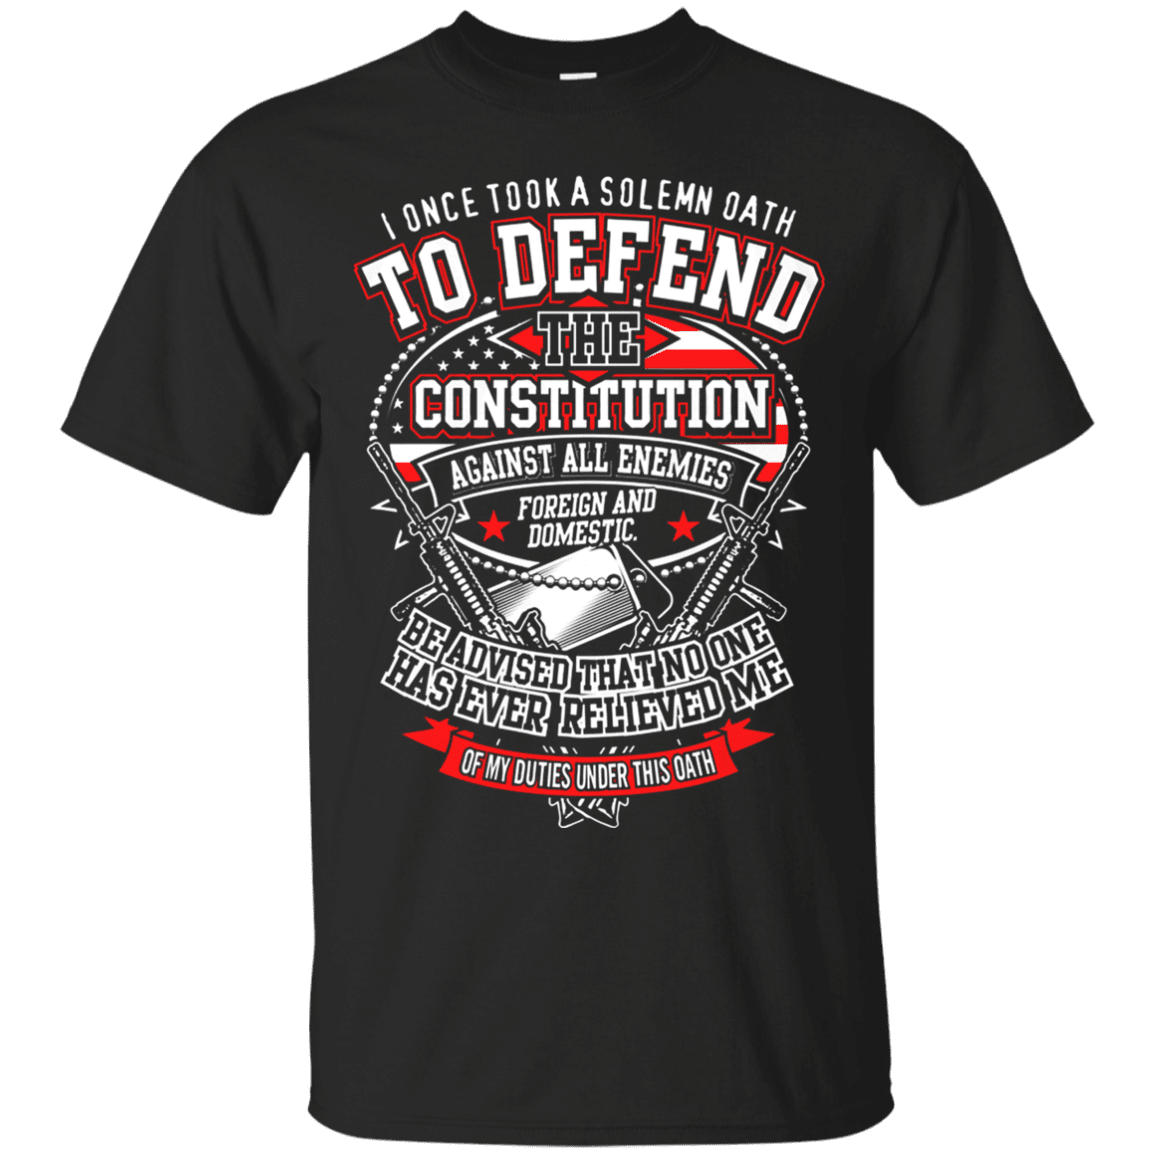 Military T-Shirt "I Once Tool A Solemn Oath to Defend The Constitution Men" Front-TShirt-General-Veterans Nation